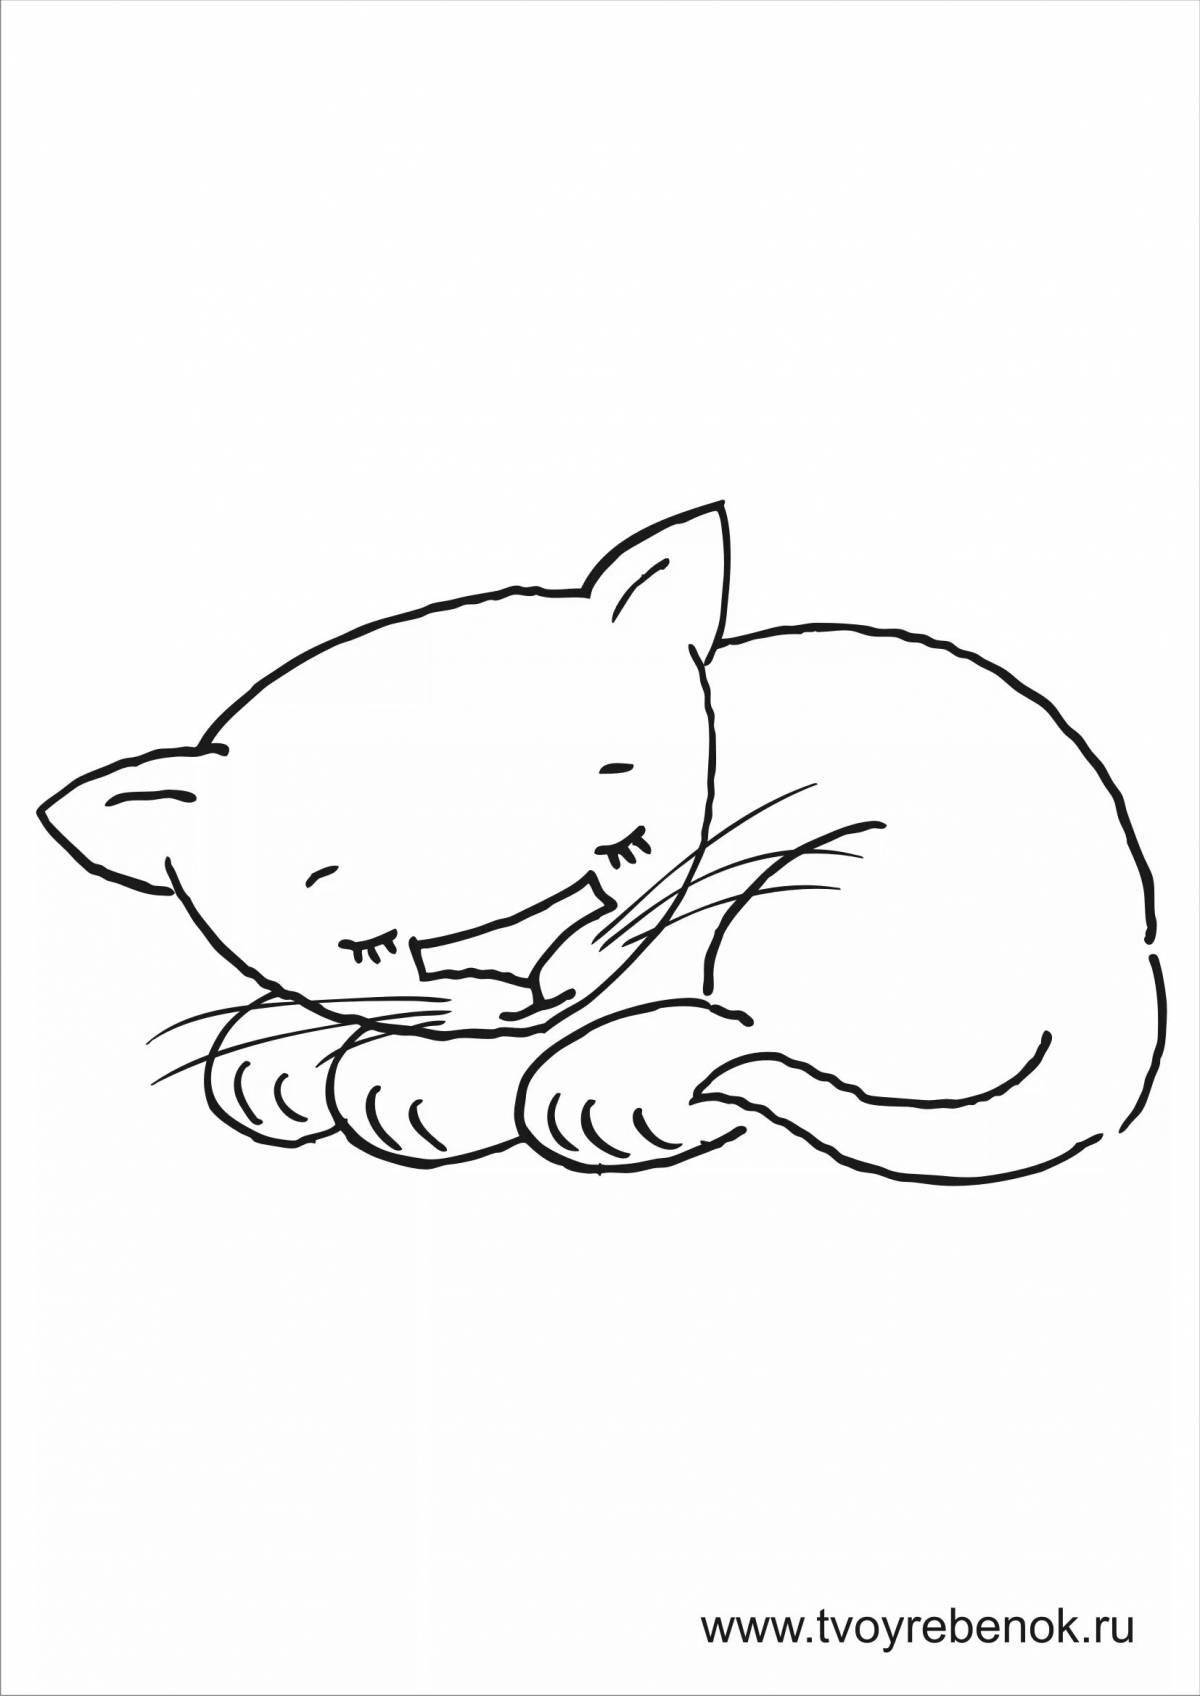 Coloring page cozy sleeping cat